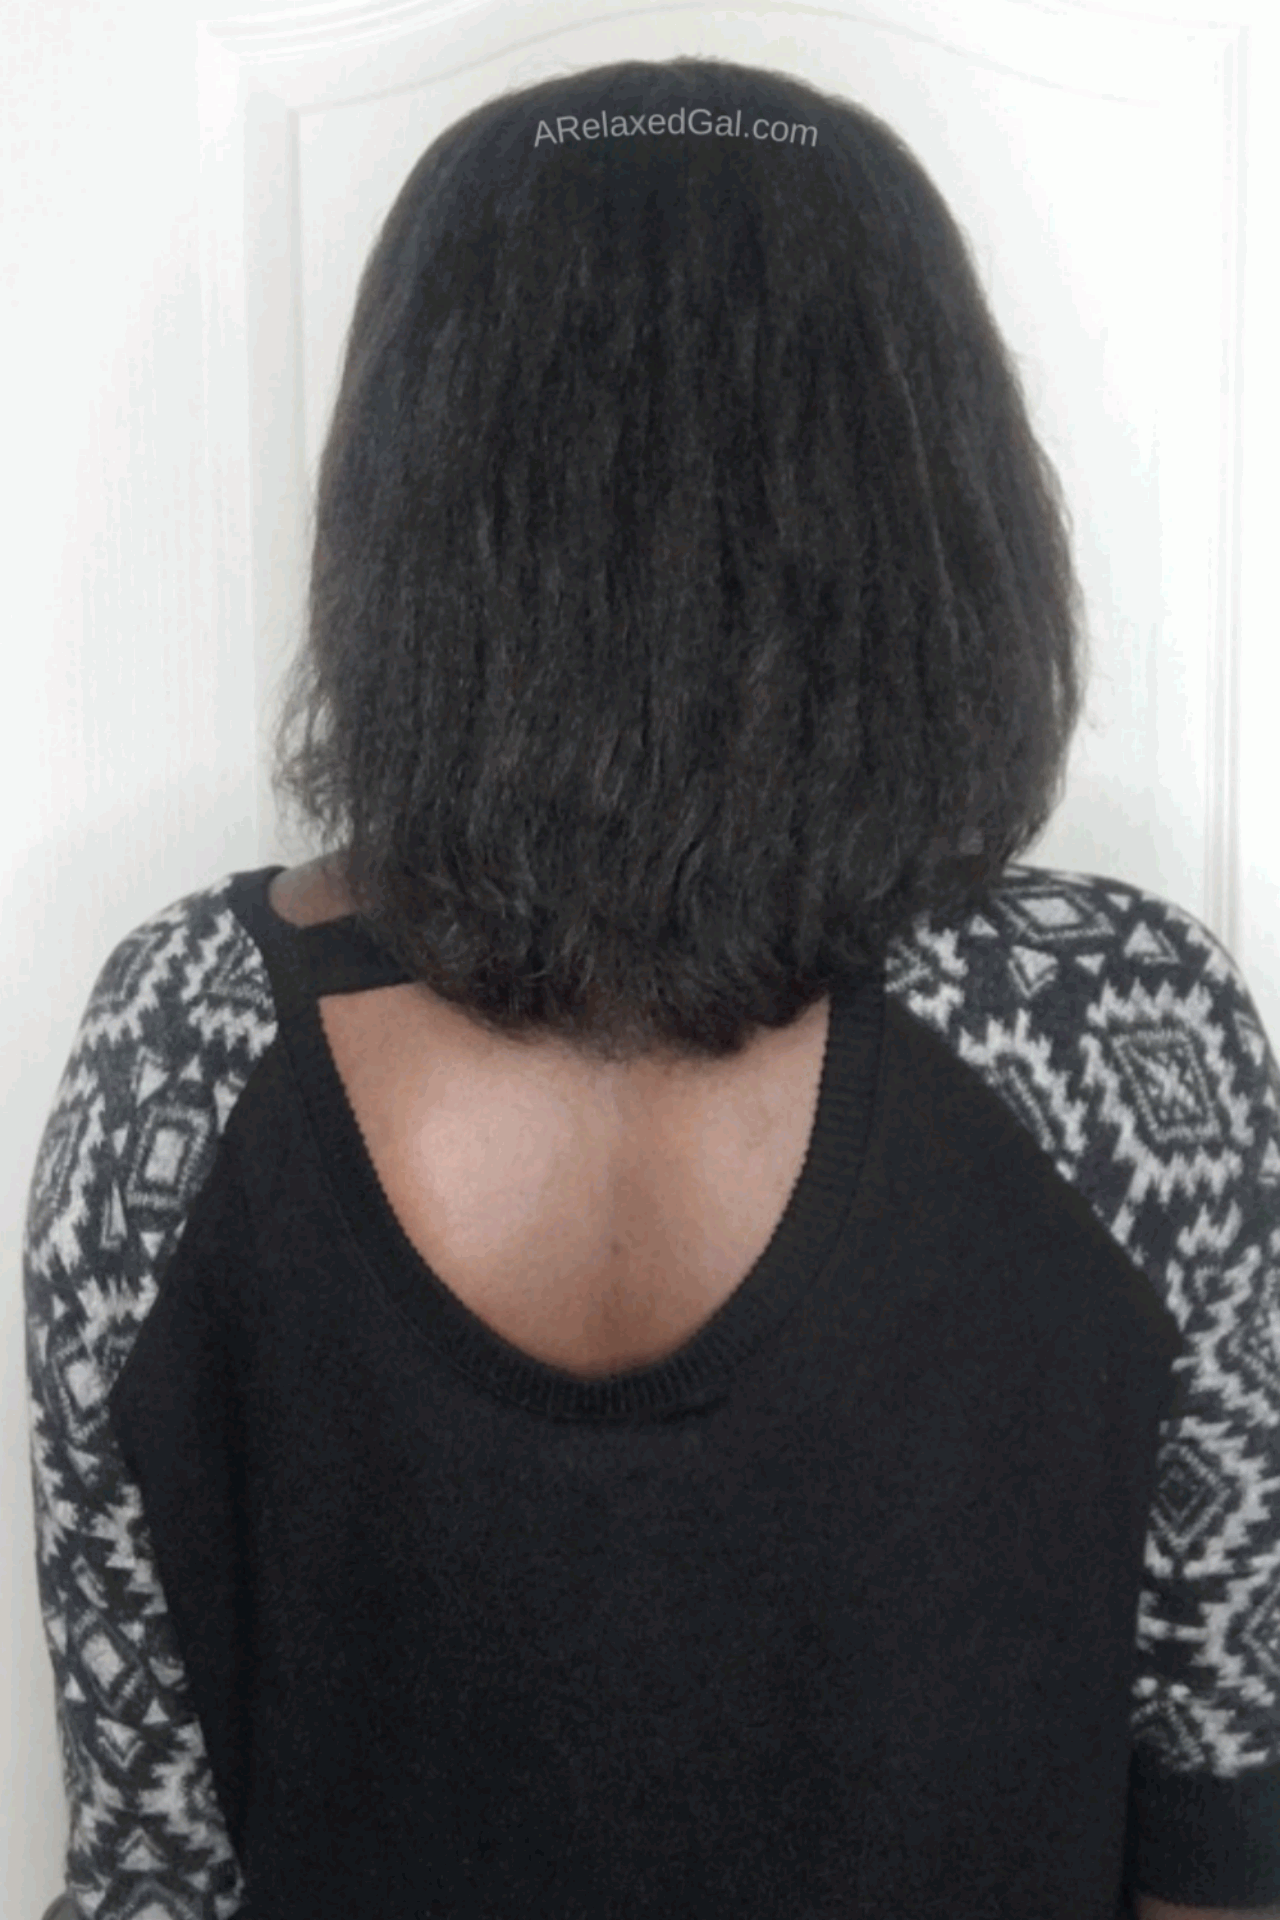 Dealing With Under-processed Relaxed Hair | A Relaxed Gal